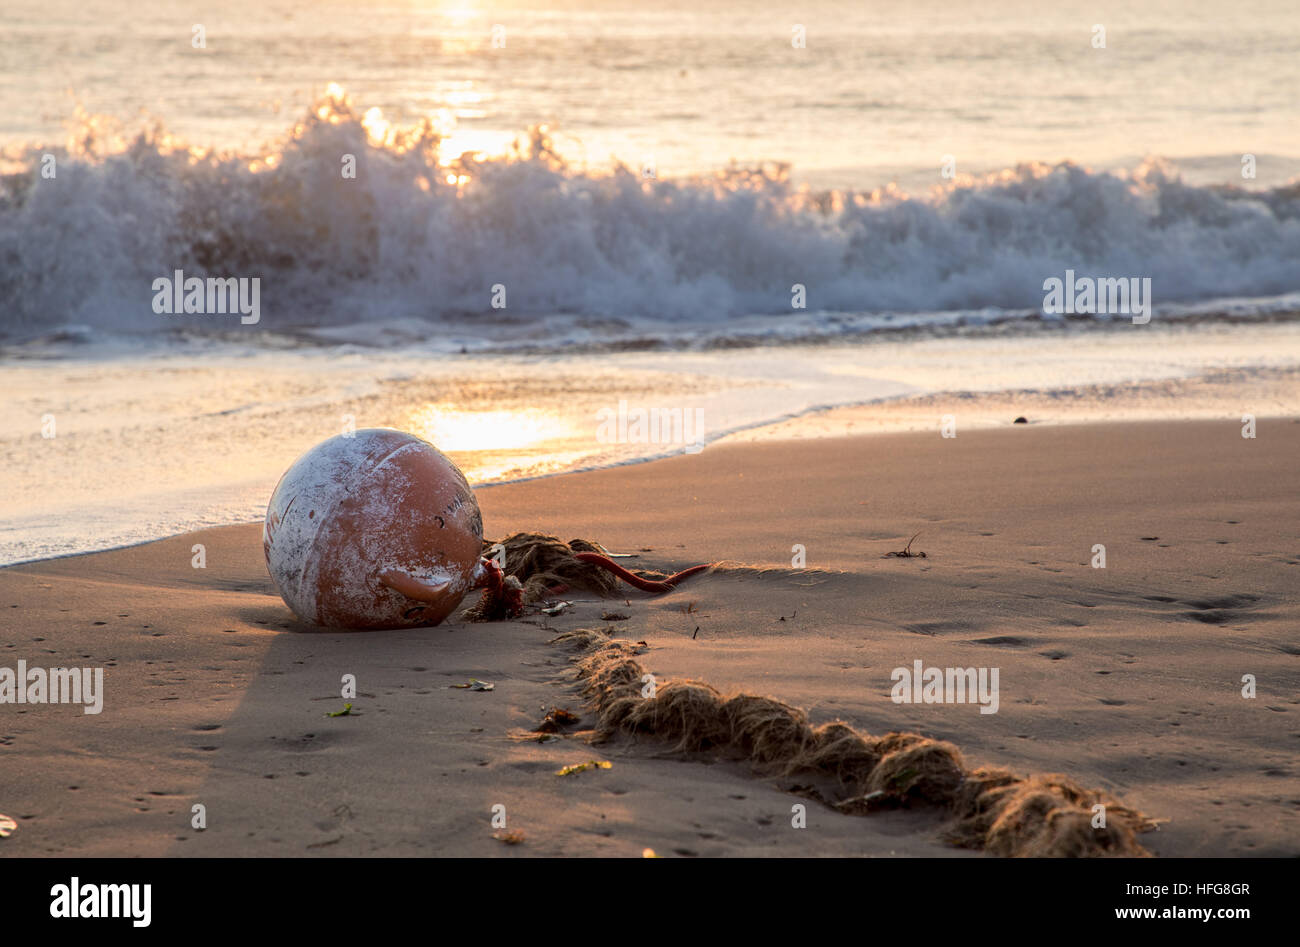 buoy and old worn rope beached in bay at sunrise Stock Photo